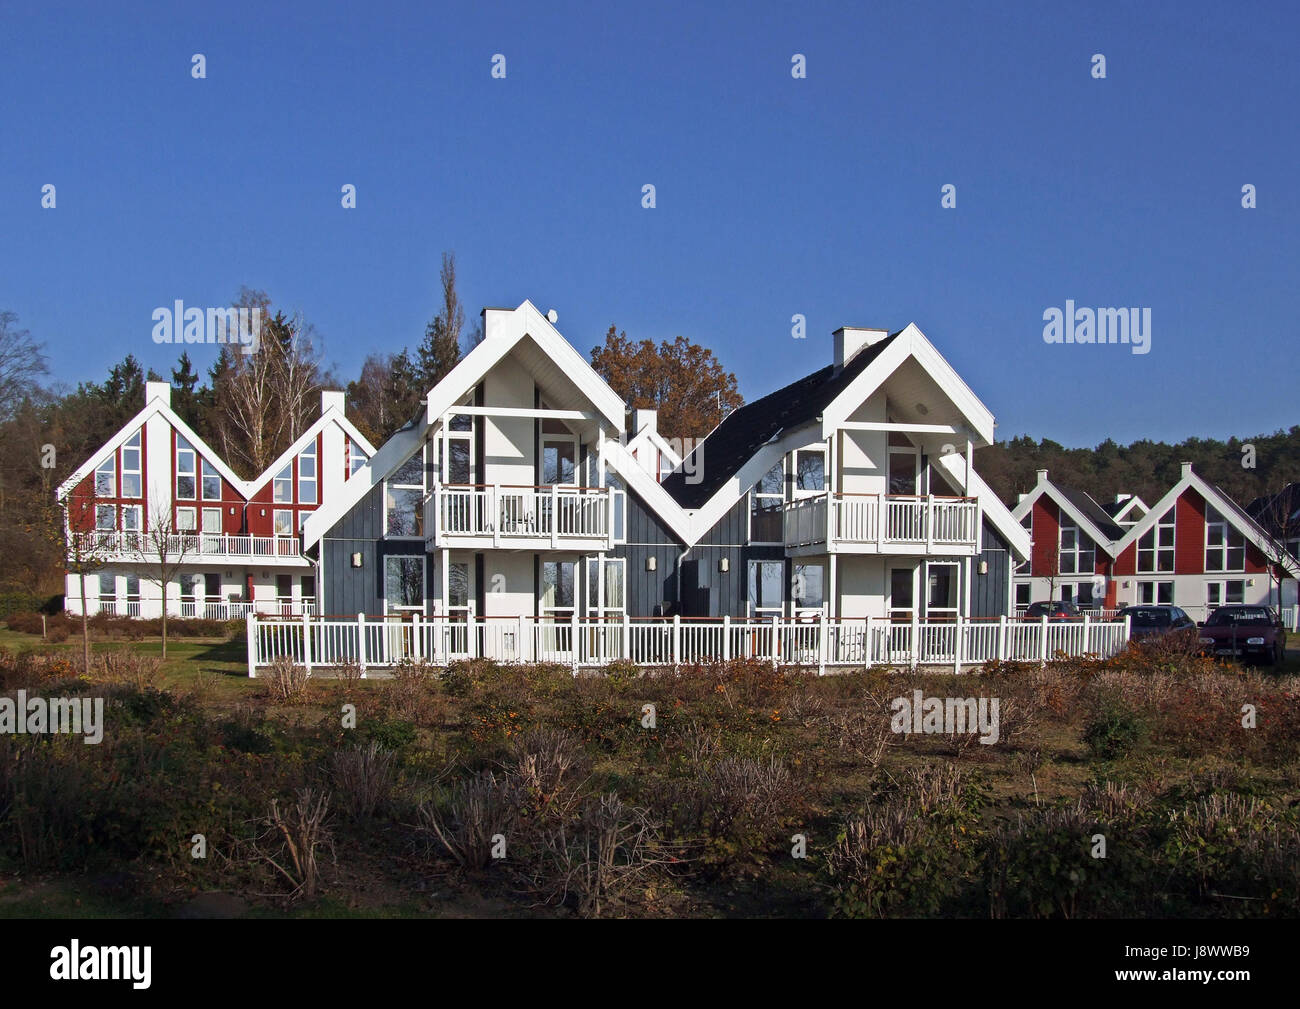 houses, sweden, framehouse, terrace house, to reside, abode, abide, colonize, Stock Photo